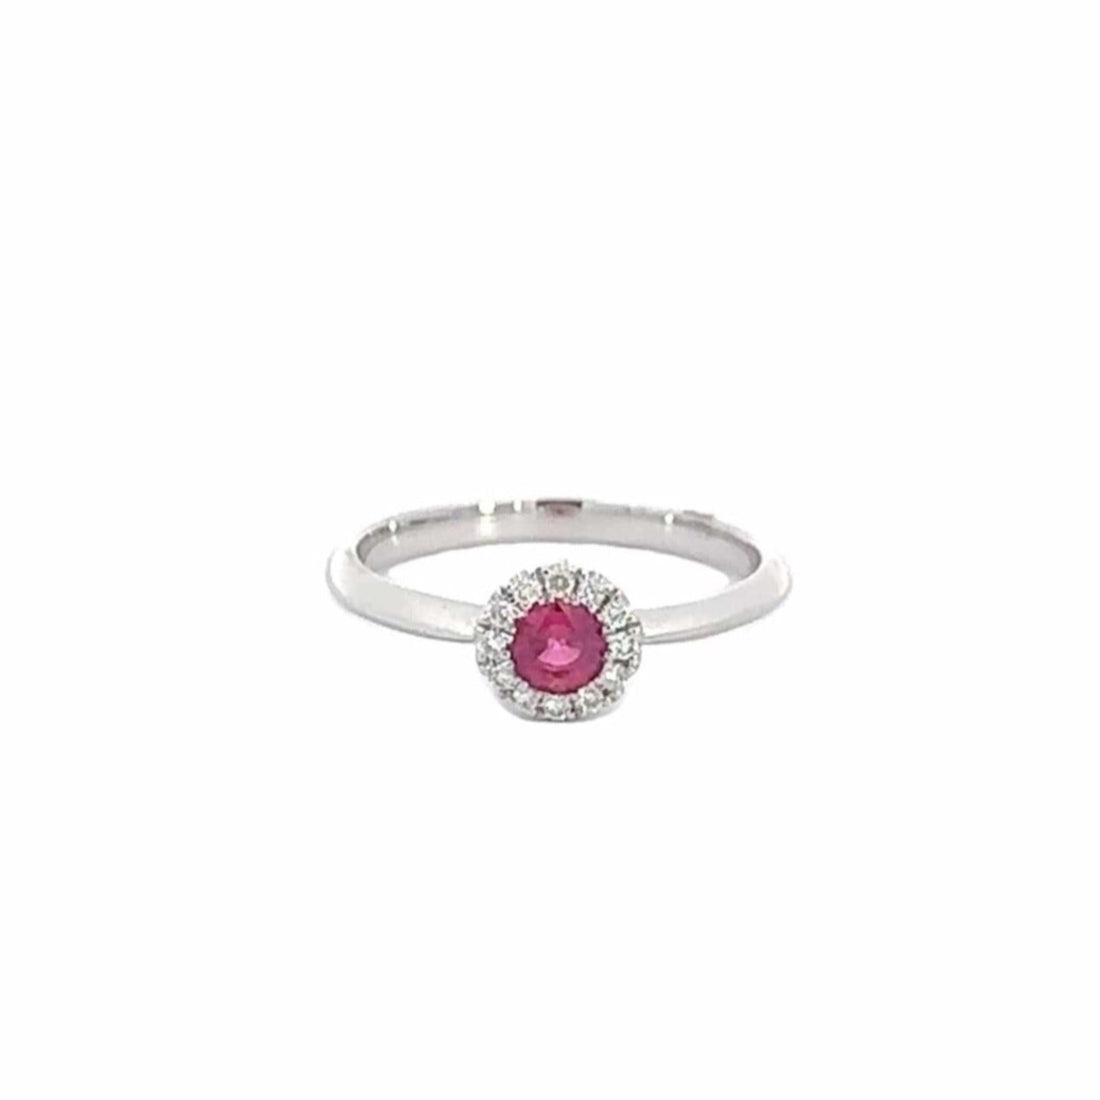 Baikalla Jewelry Gold Ruby Ring Copy of 18k White Gold Natural 3 Round Pink Ruby Diamond Anniversary Ring